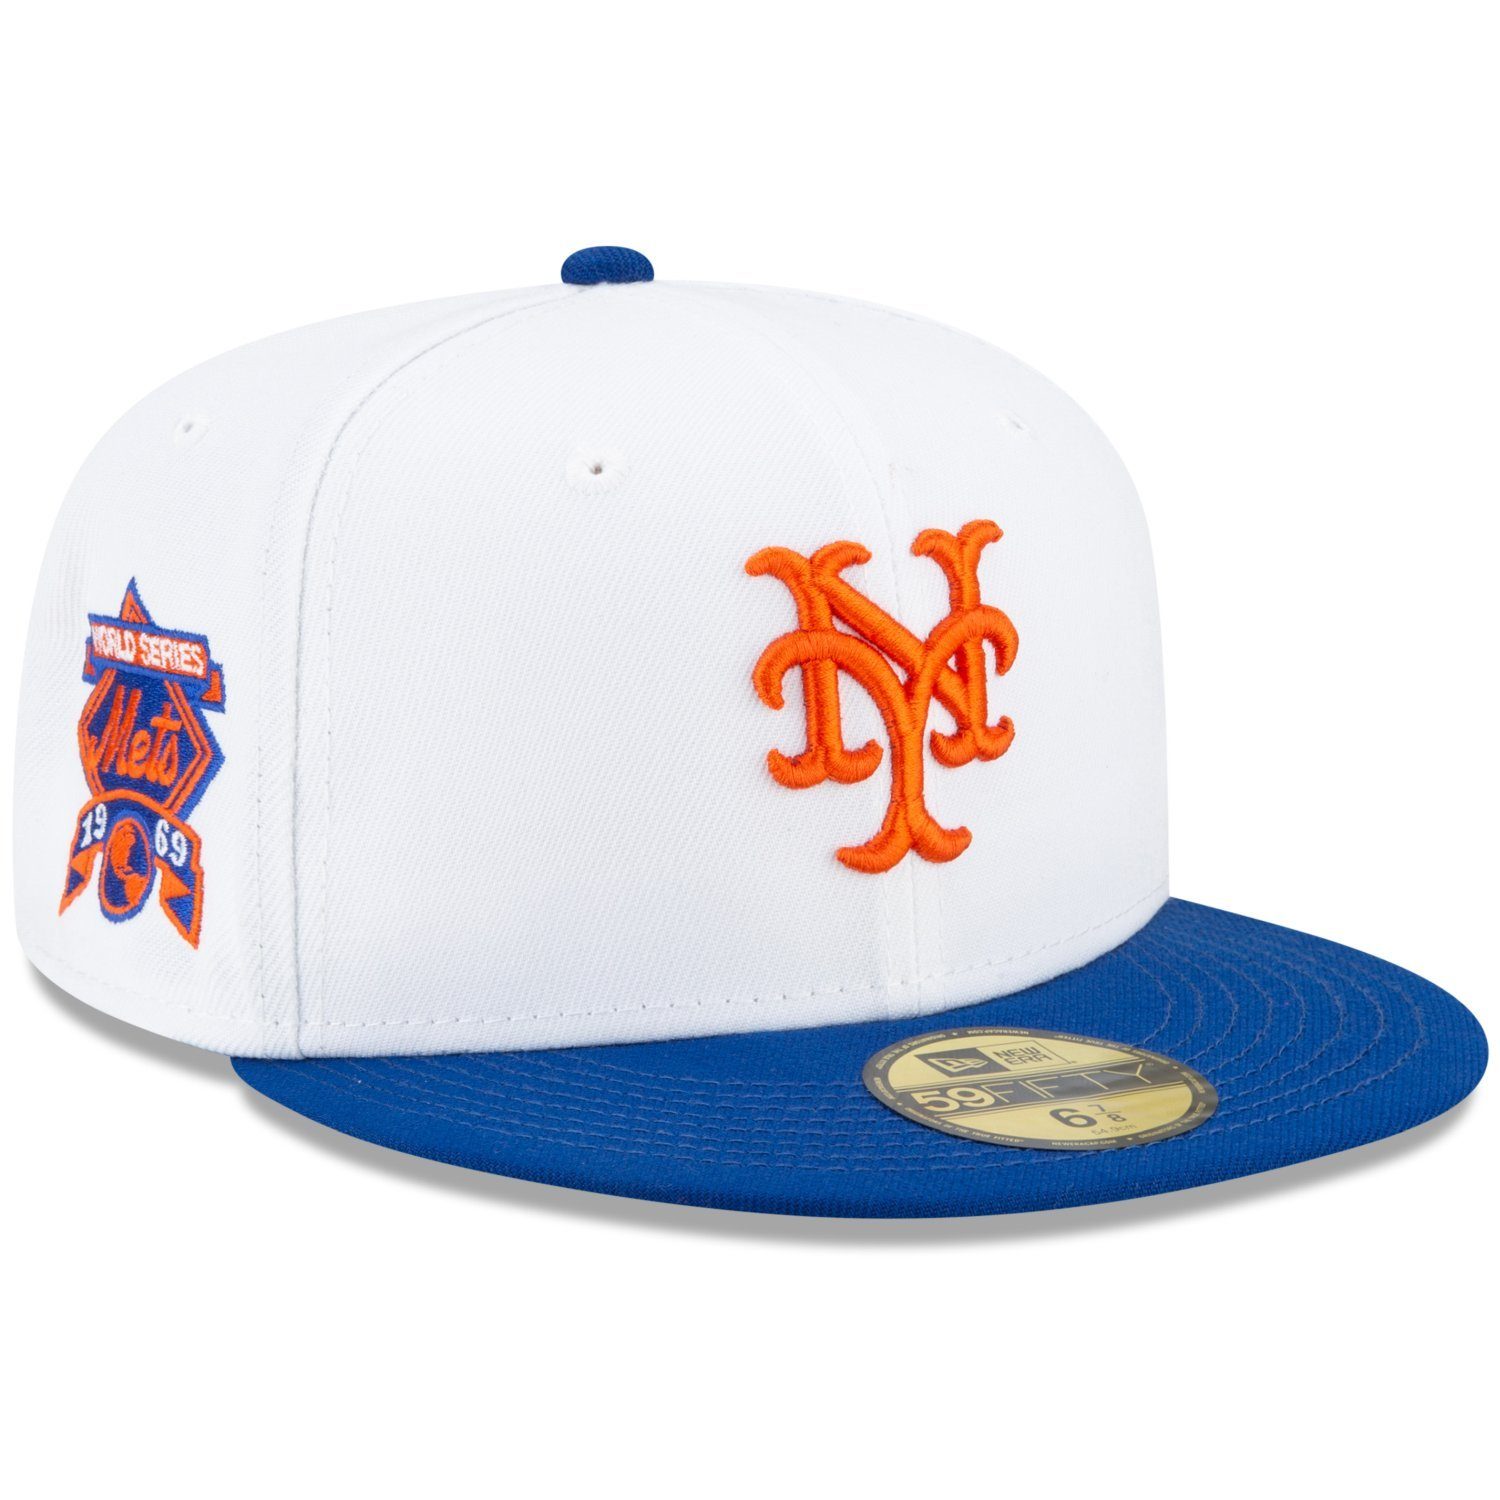 New Era Fitted Cap 59Fifty 1969 WORLD Mets York SERIES New